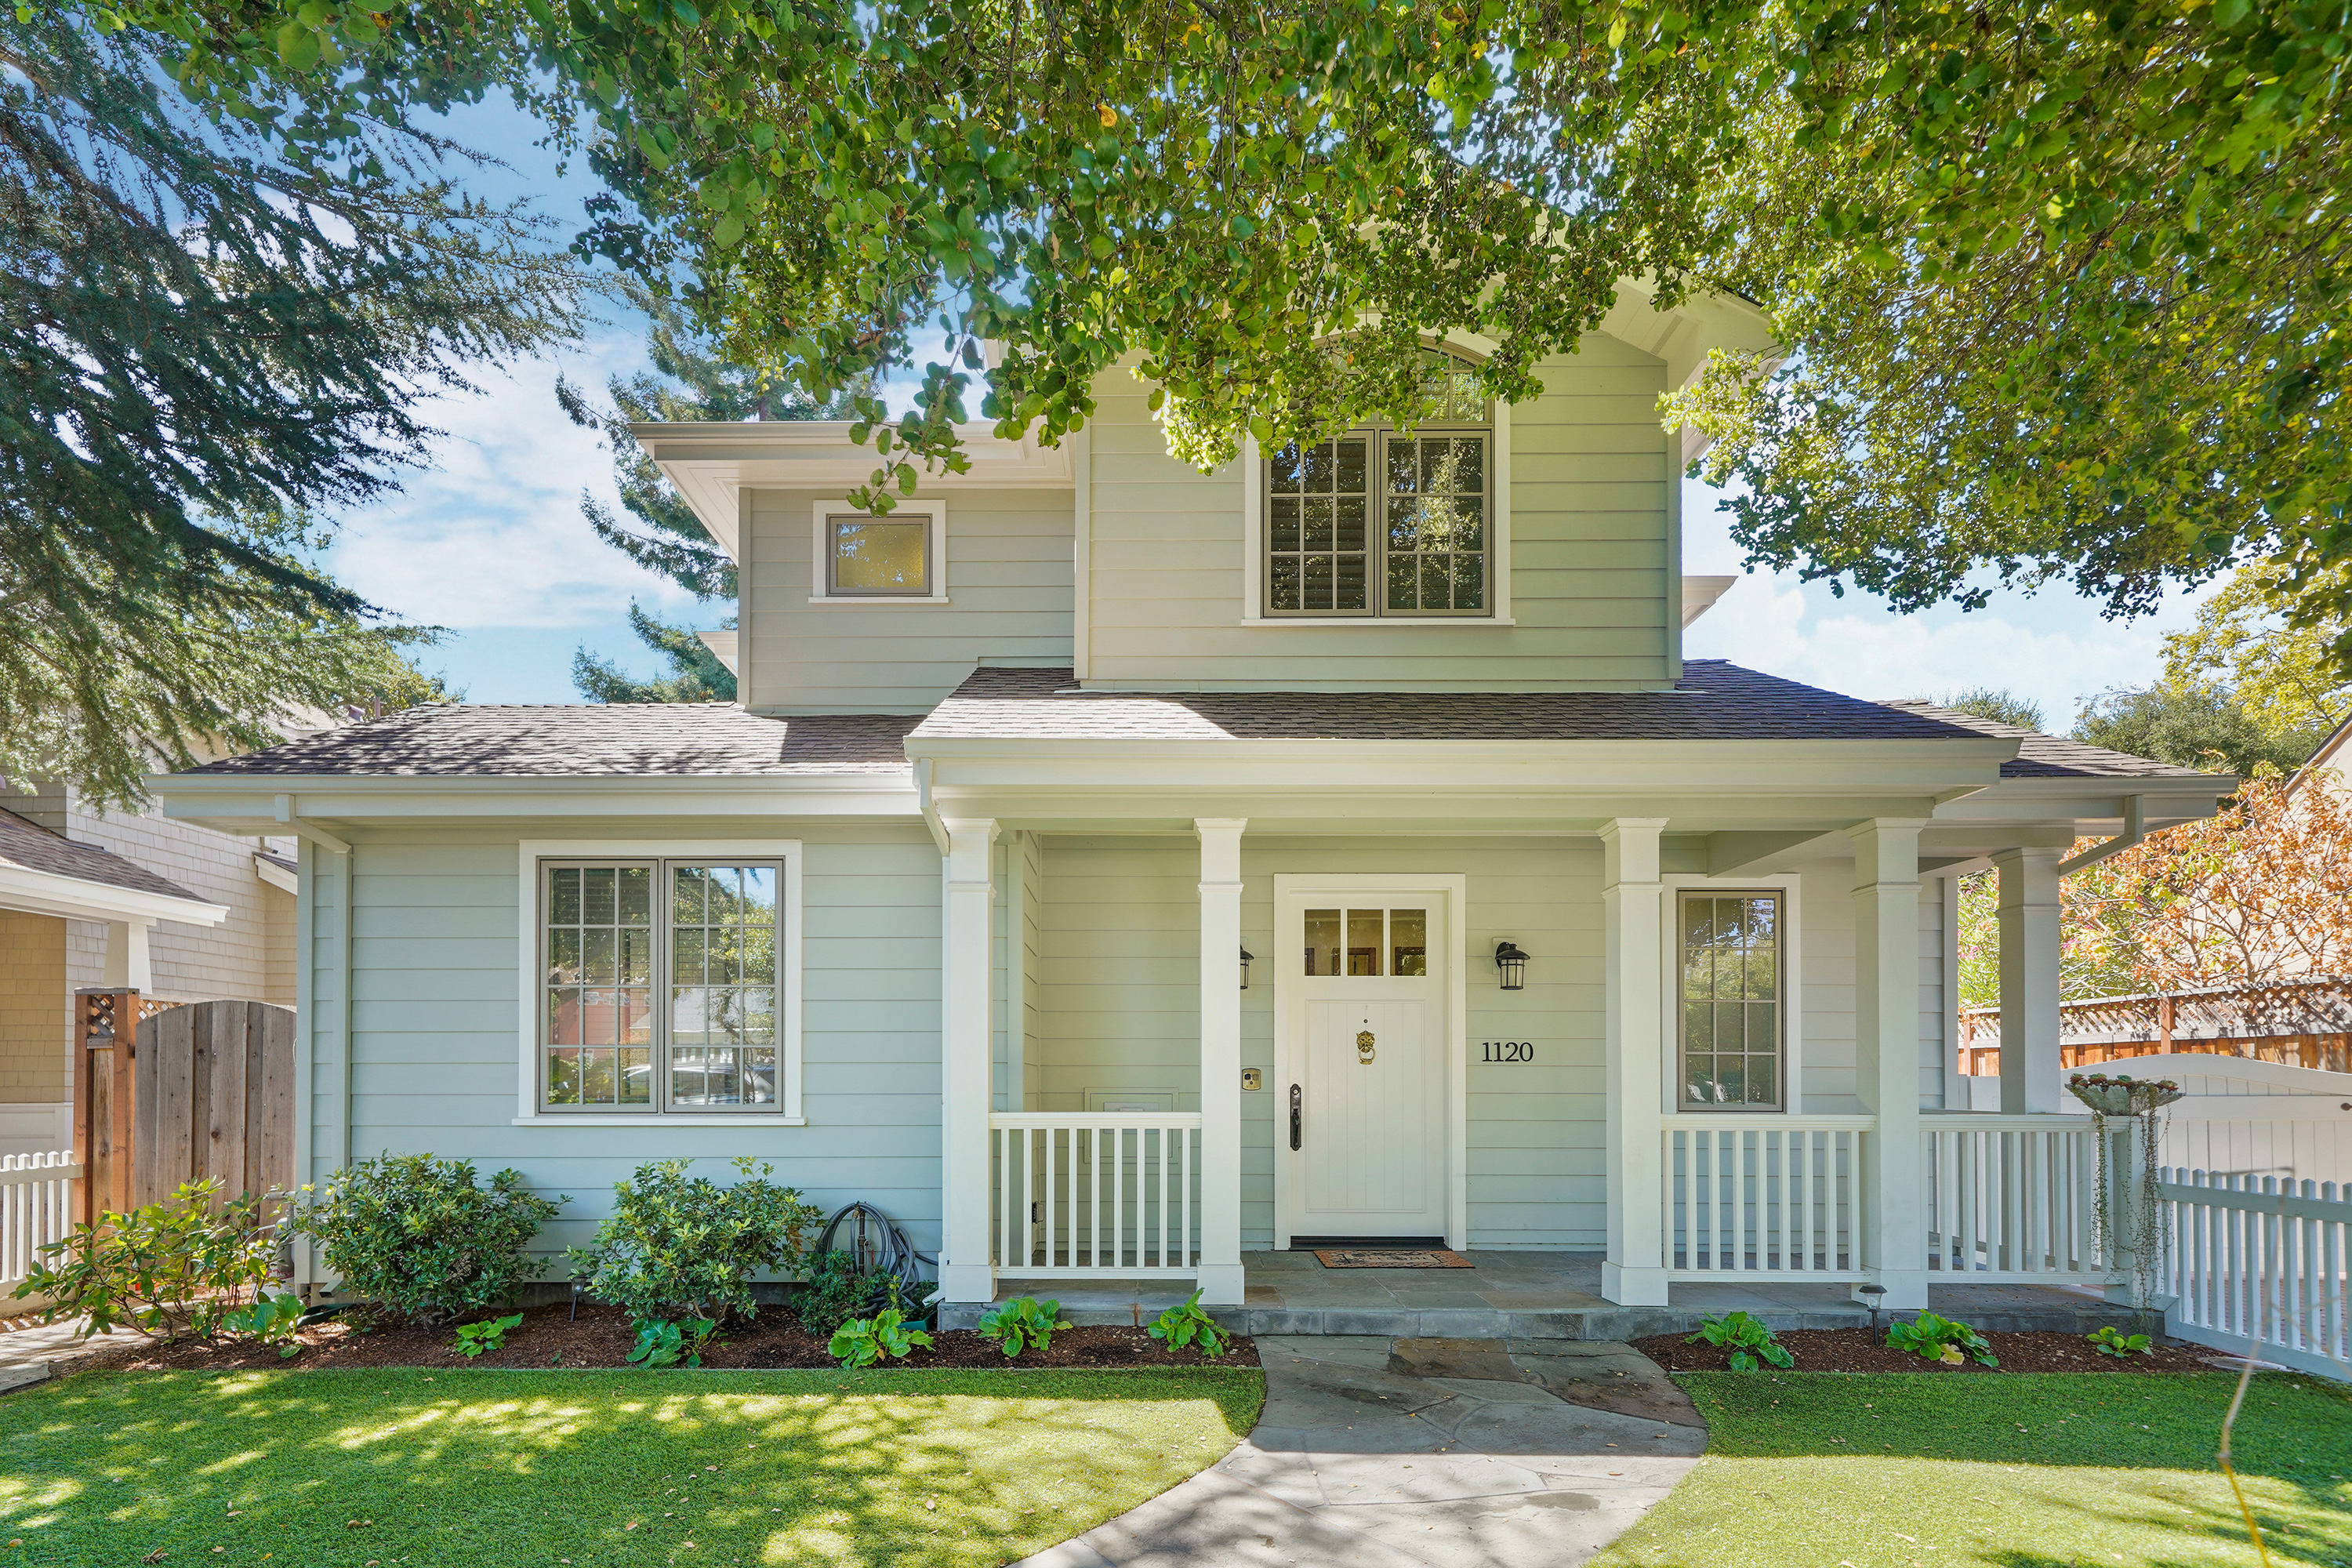 Front View - 1120 Middlefield Rd, Palo Alto 94301